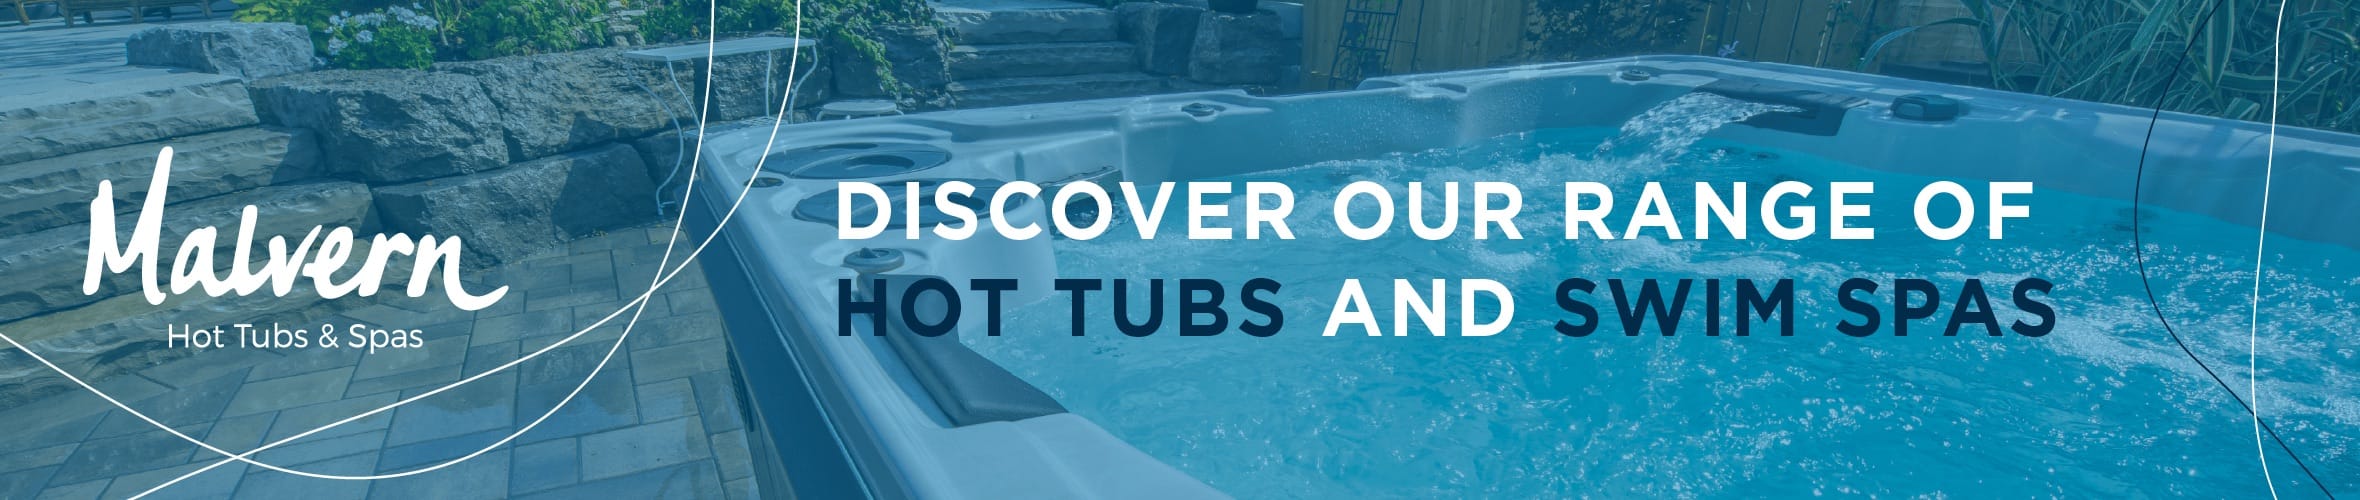 Discover our range of Hot Tubs and Swim Spas